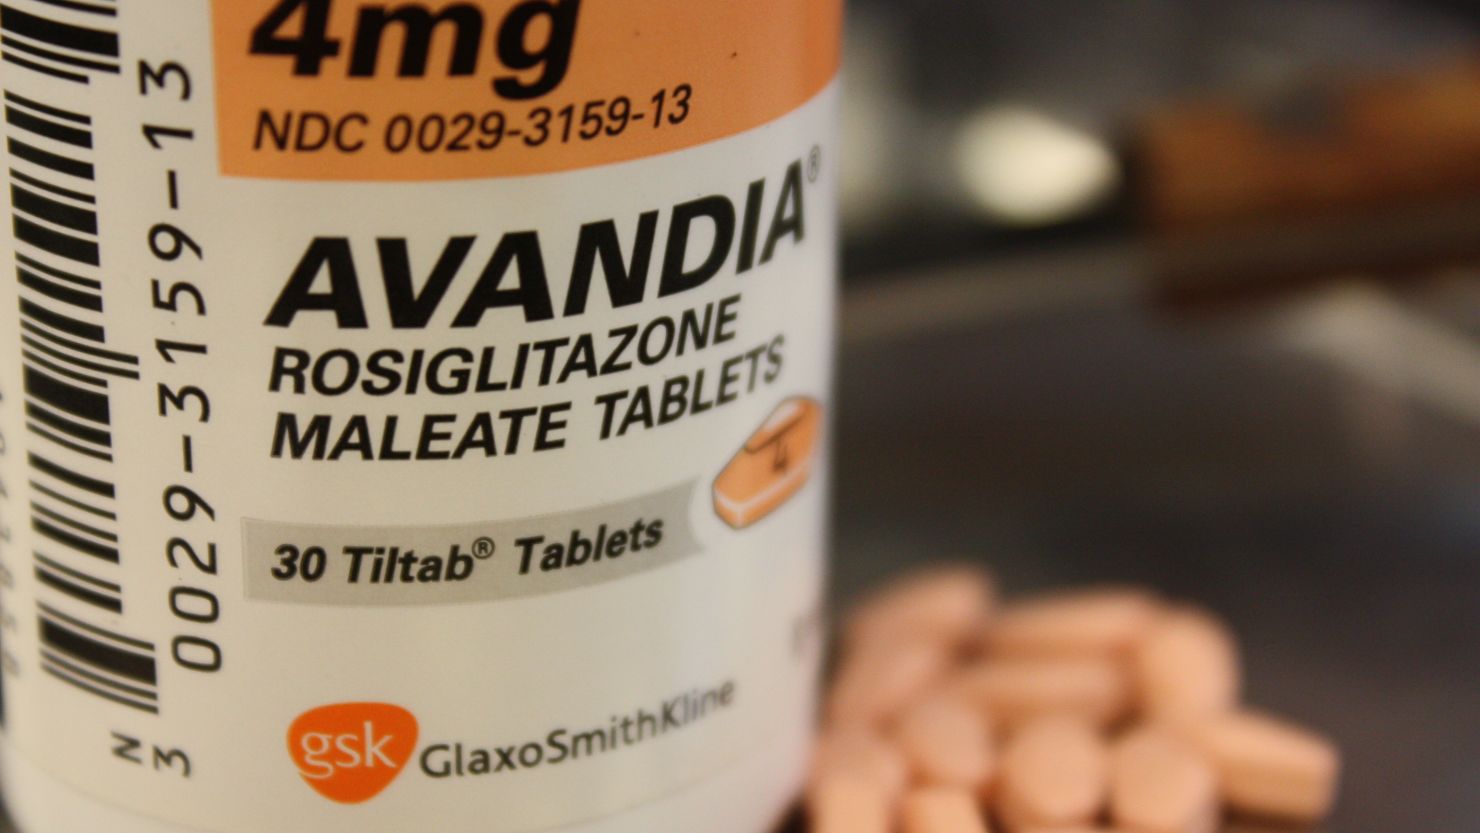 About 120,000 patients were taking Avandia before restrictions were put in place in 2010.